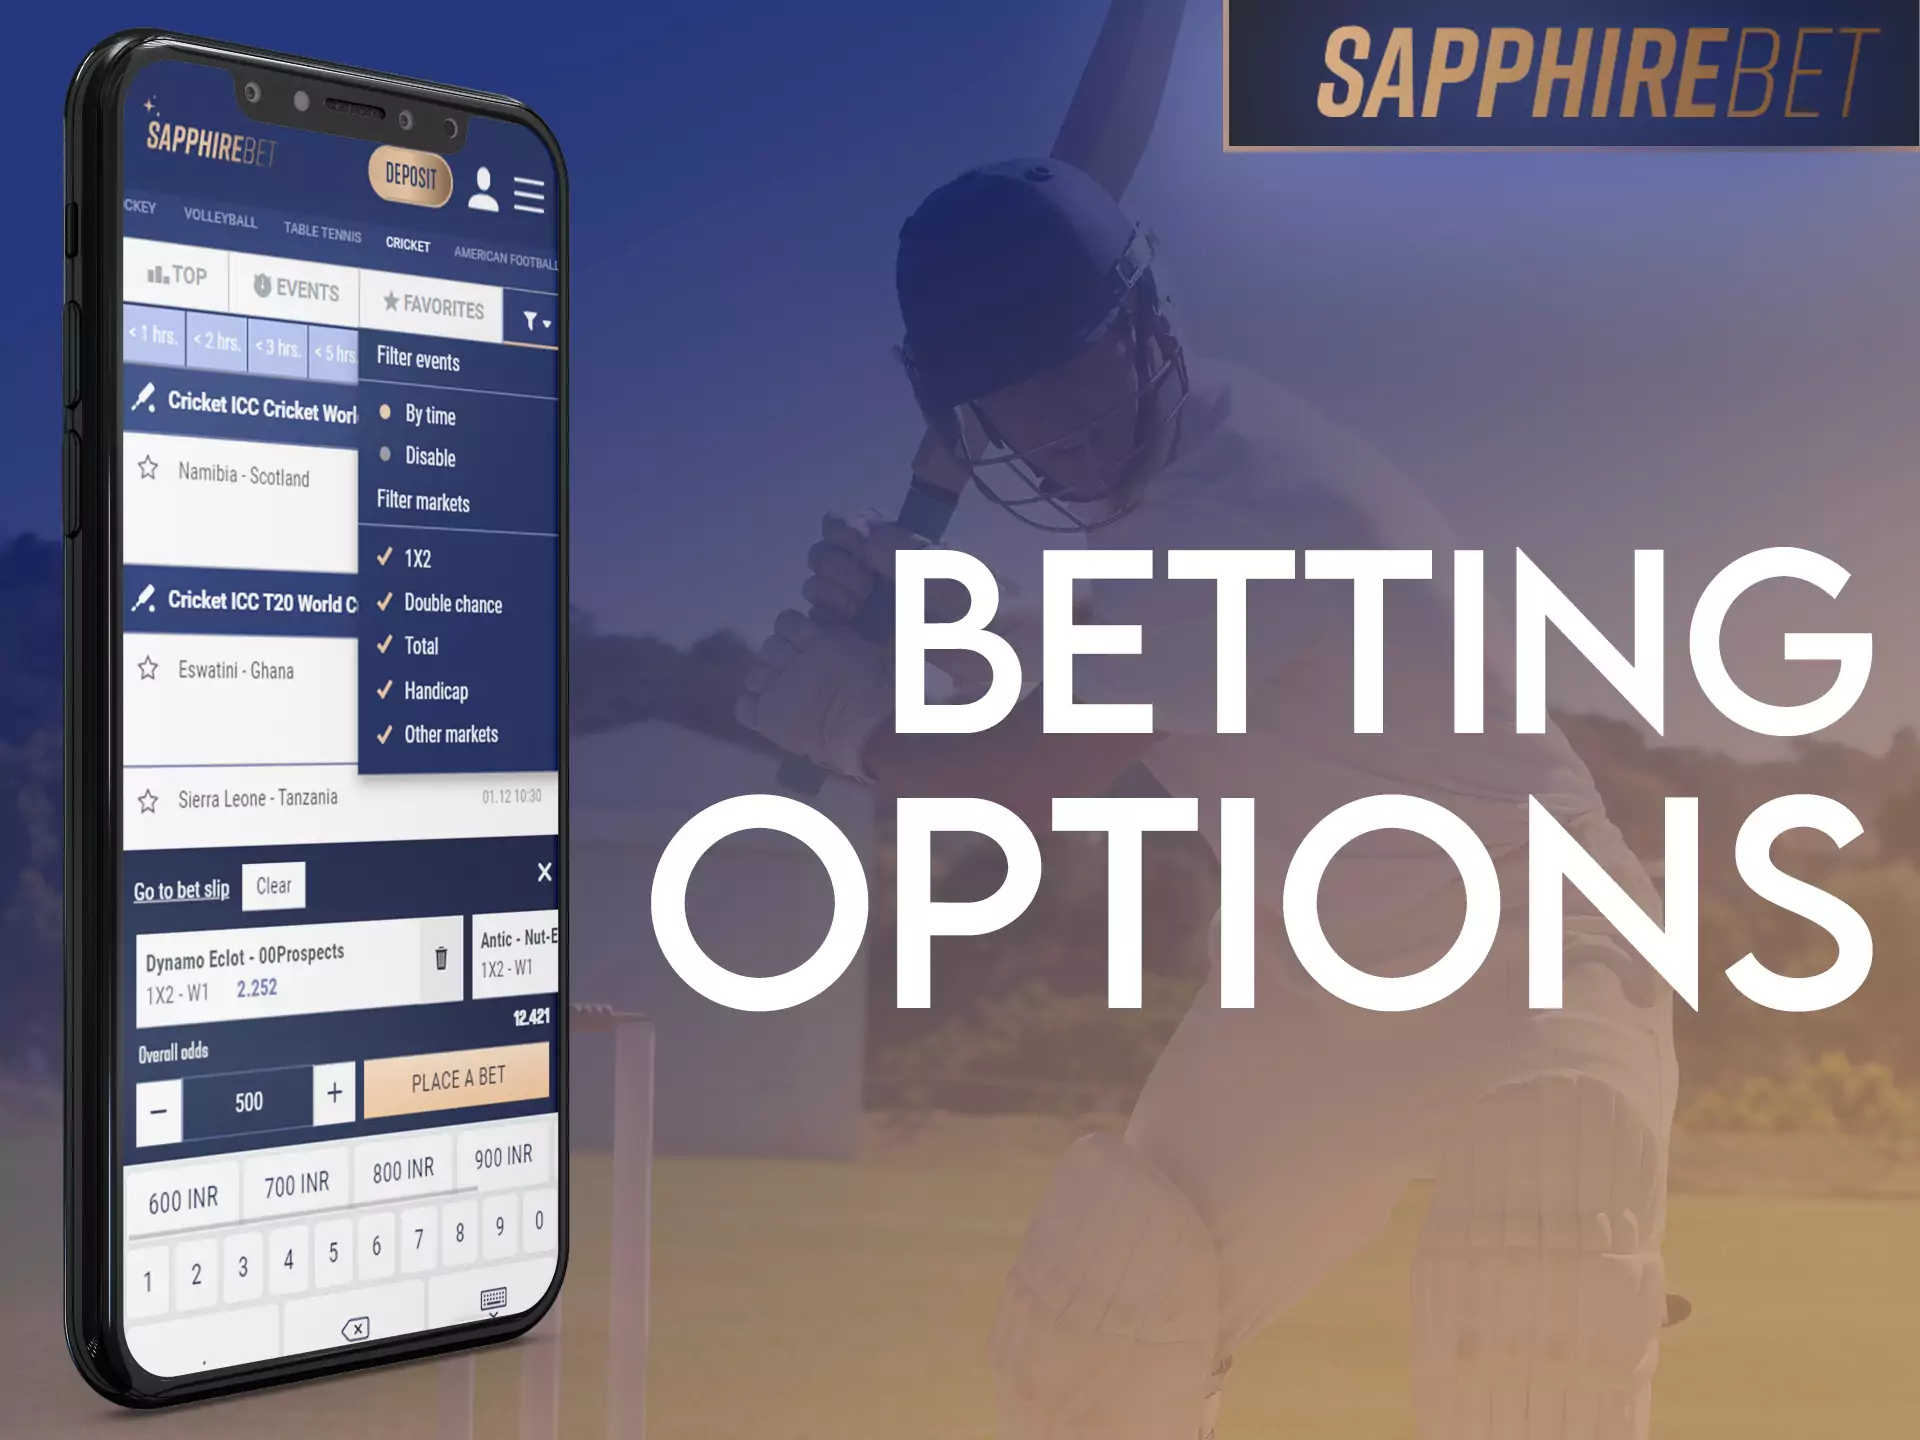 Try different betting options in Sapphirebet.